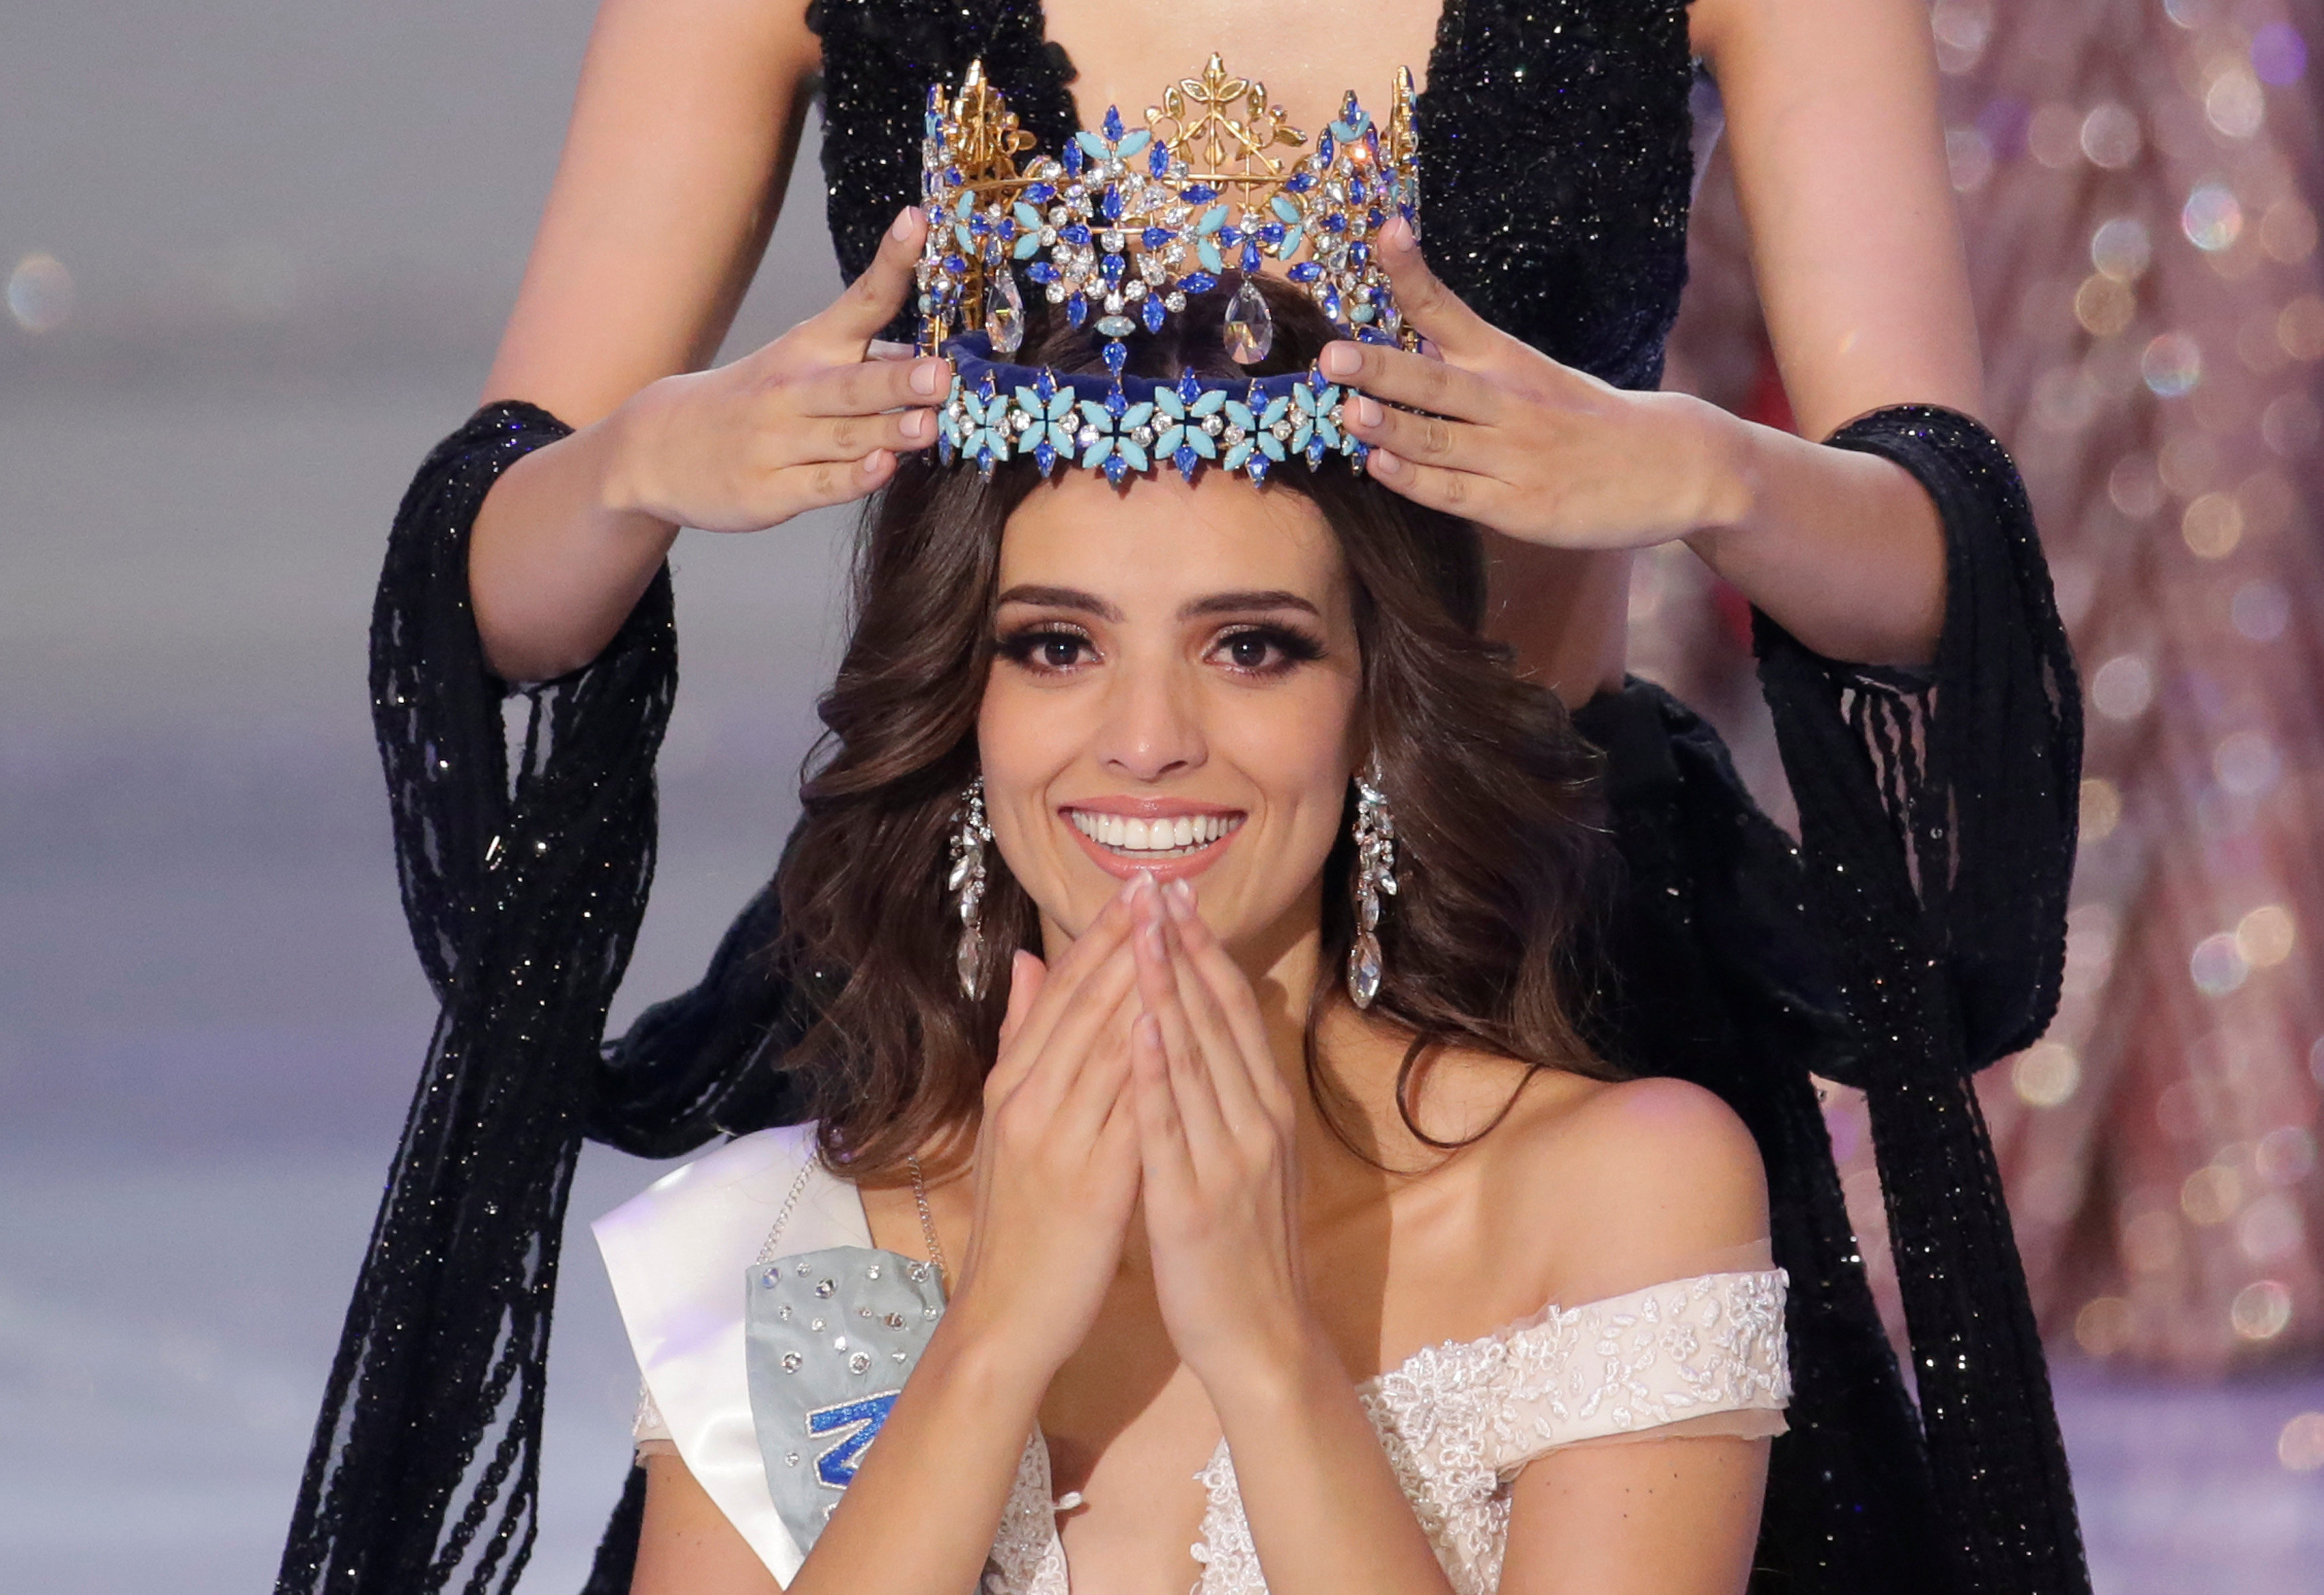 Miss Mexico Vanessa Ponce de Leon, 26, is crowned as she wins the Miss World 2018 title in Sanya, Hainan island, China December 8, 2018. REUTERS